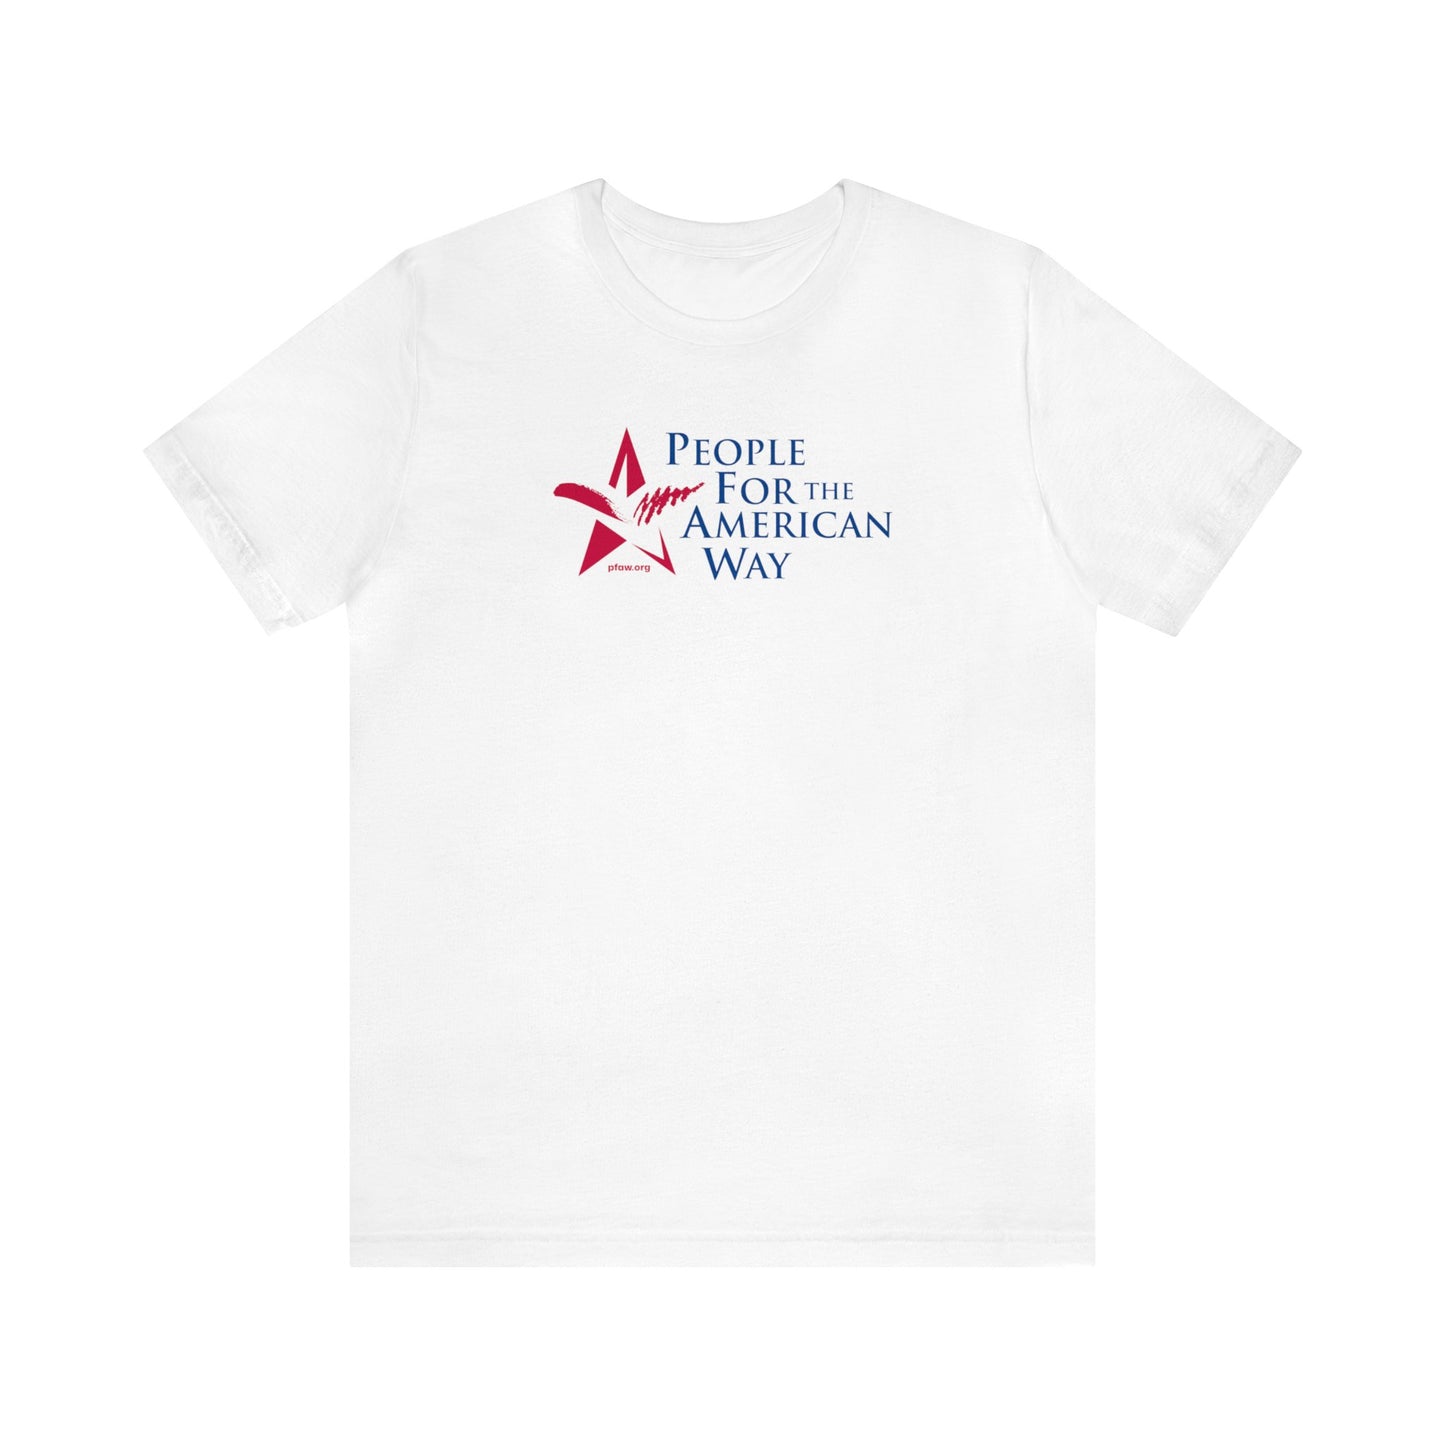 People For the American Way Shirt